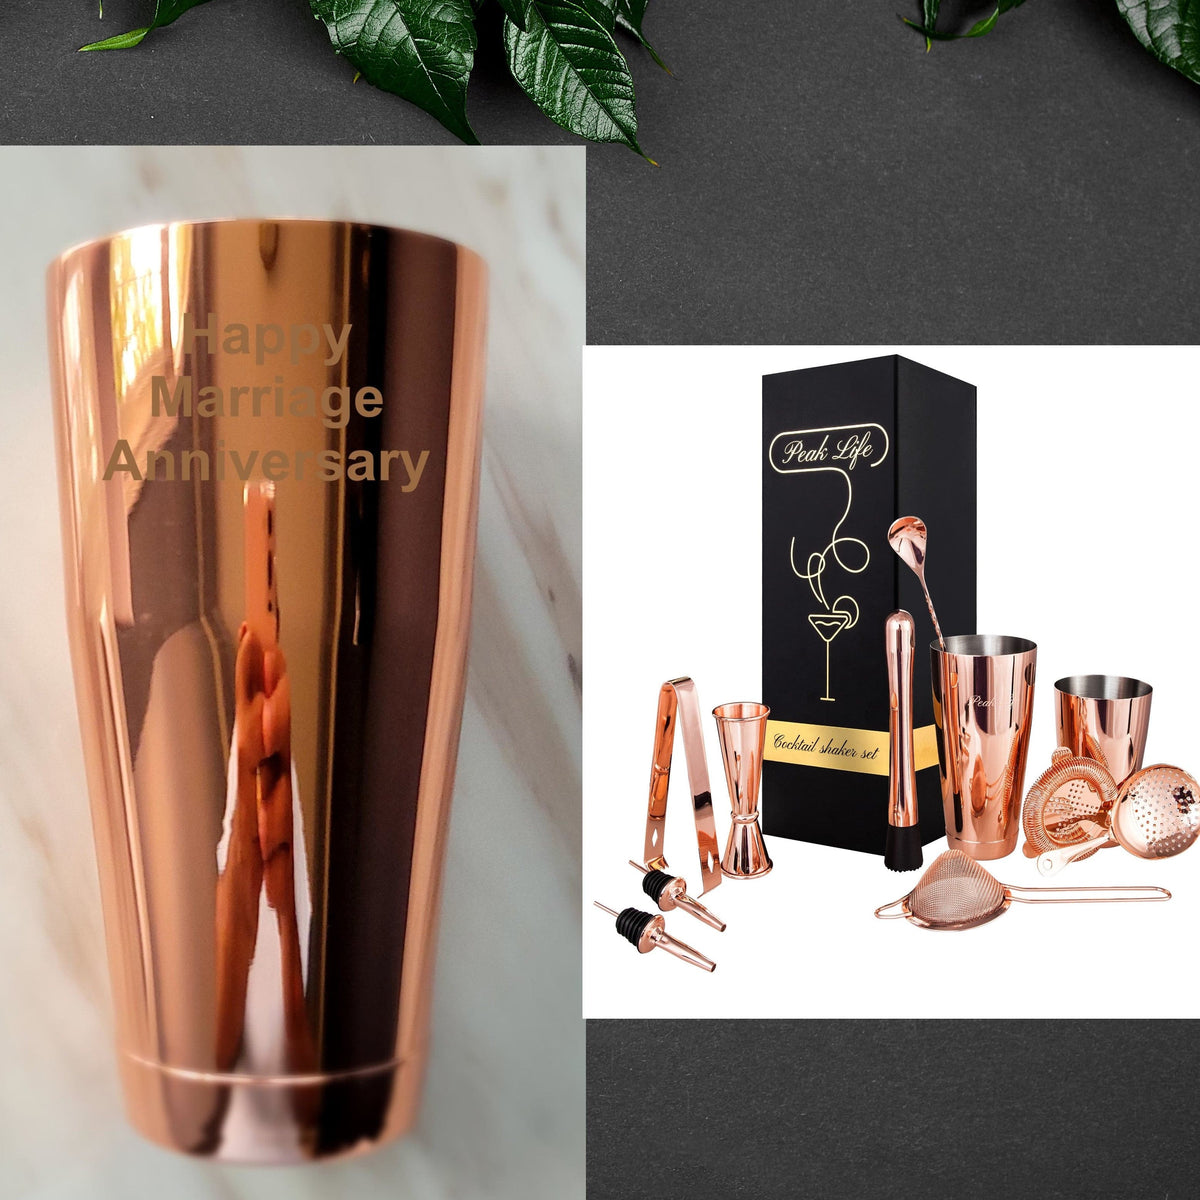 Personalized Boston Cocktail Shaker Professional Bartender Kit - Copper Color.